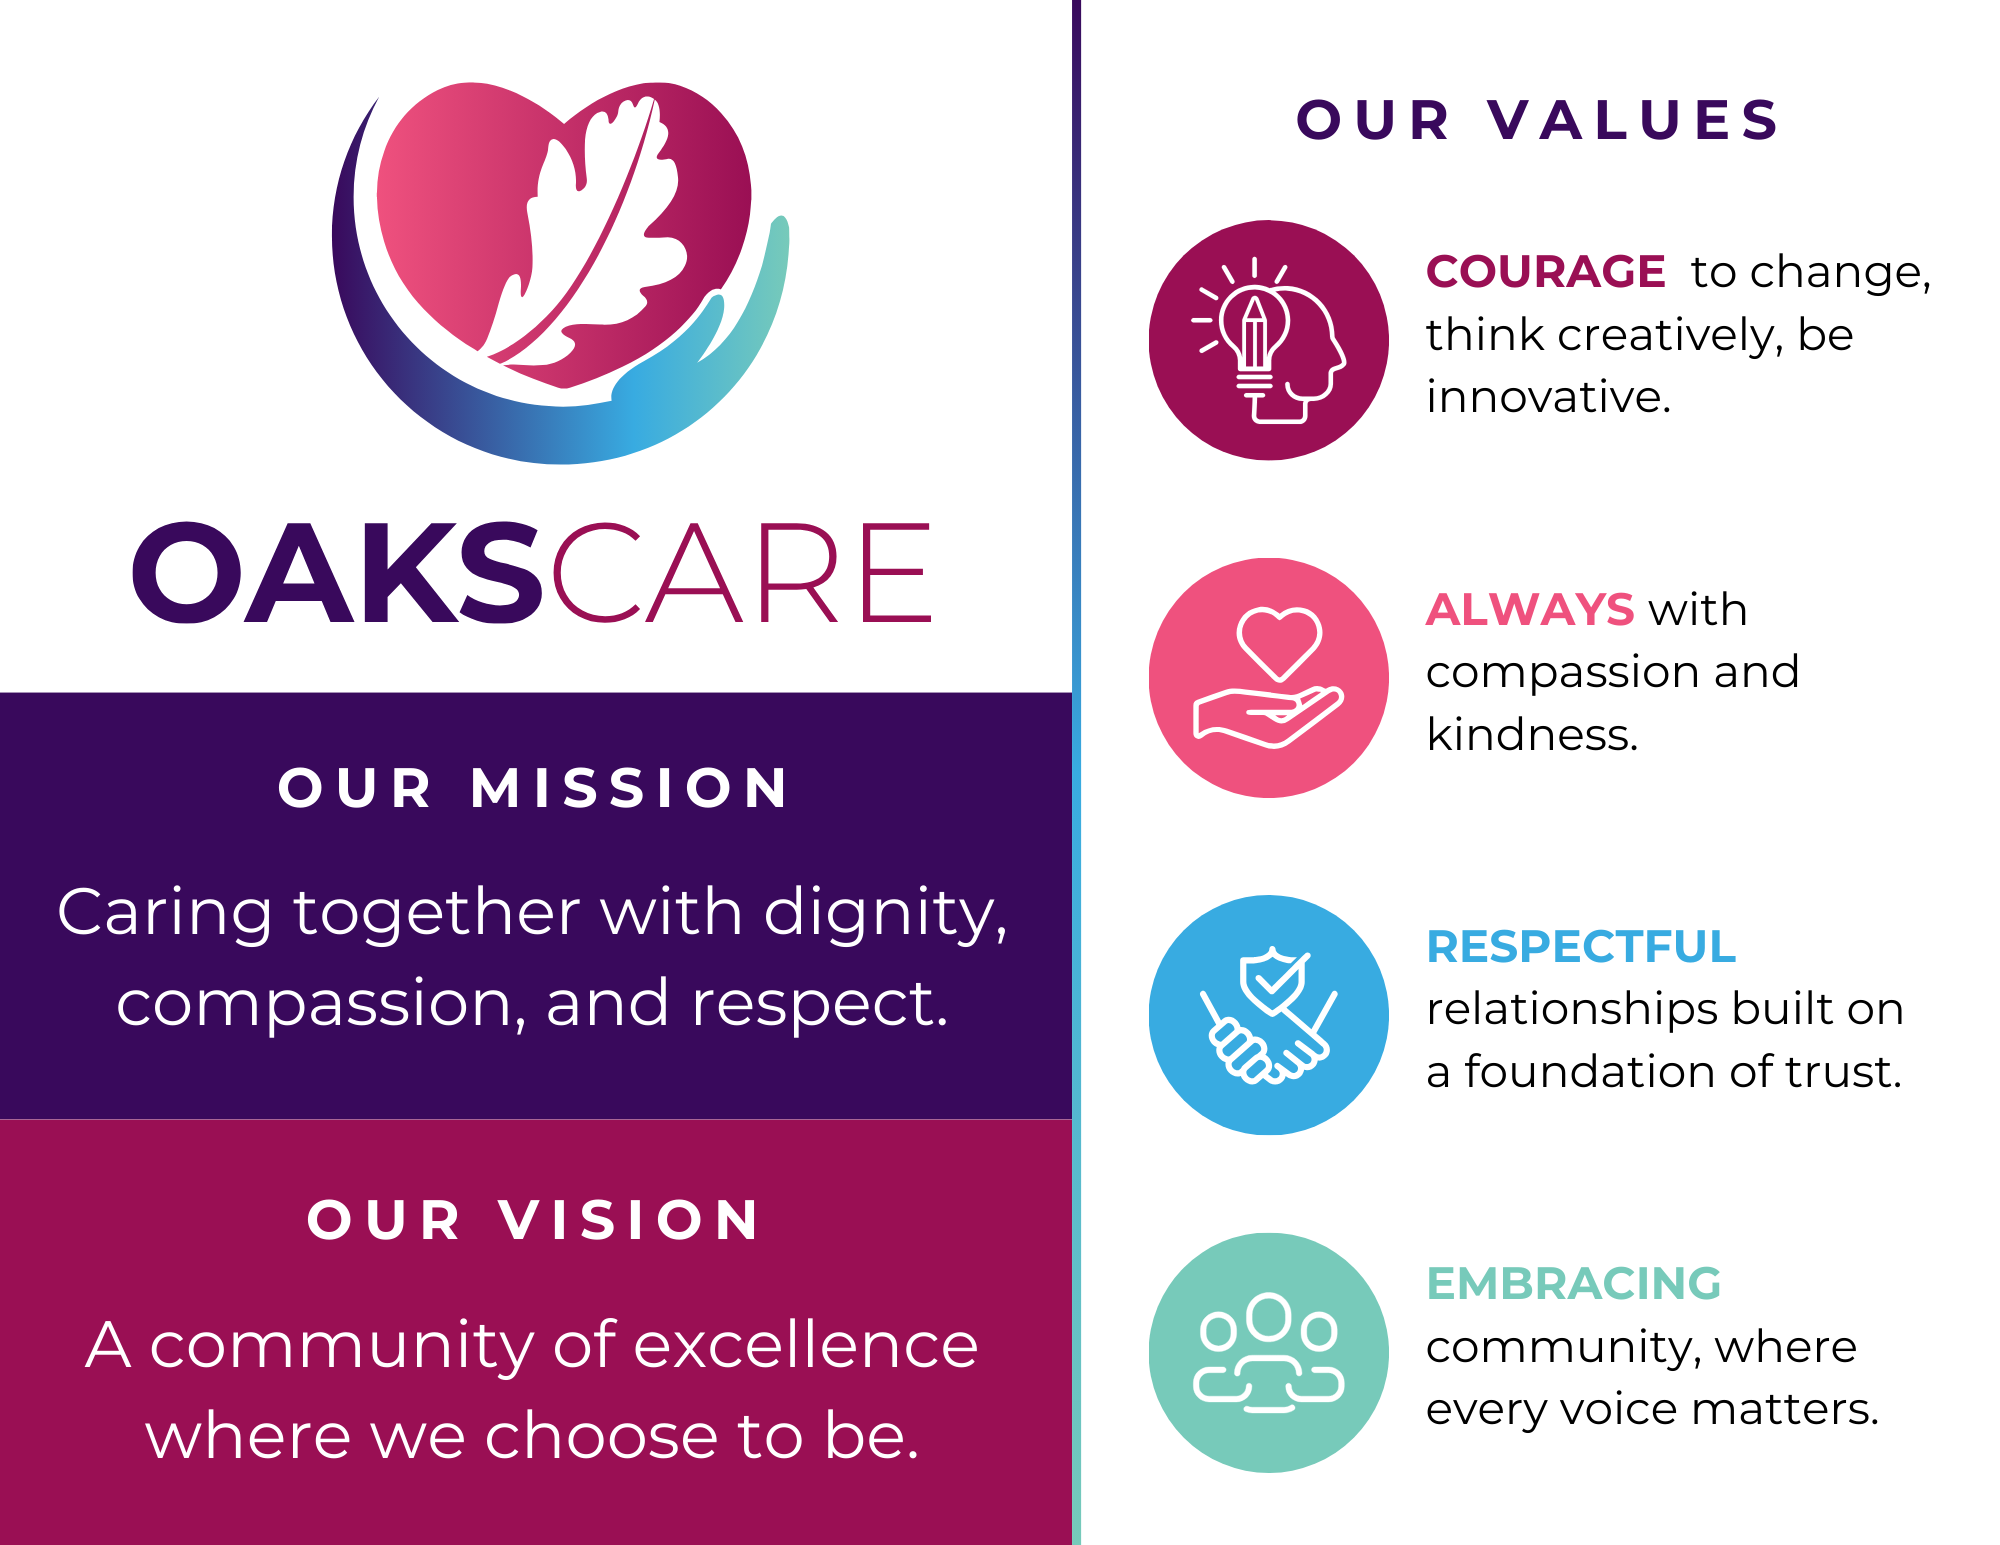 Dufferin Oaks' Mission, Vision and Values are displayed outlining Courage, Always with Compassion, Respect and Embracing the community are highlighted.